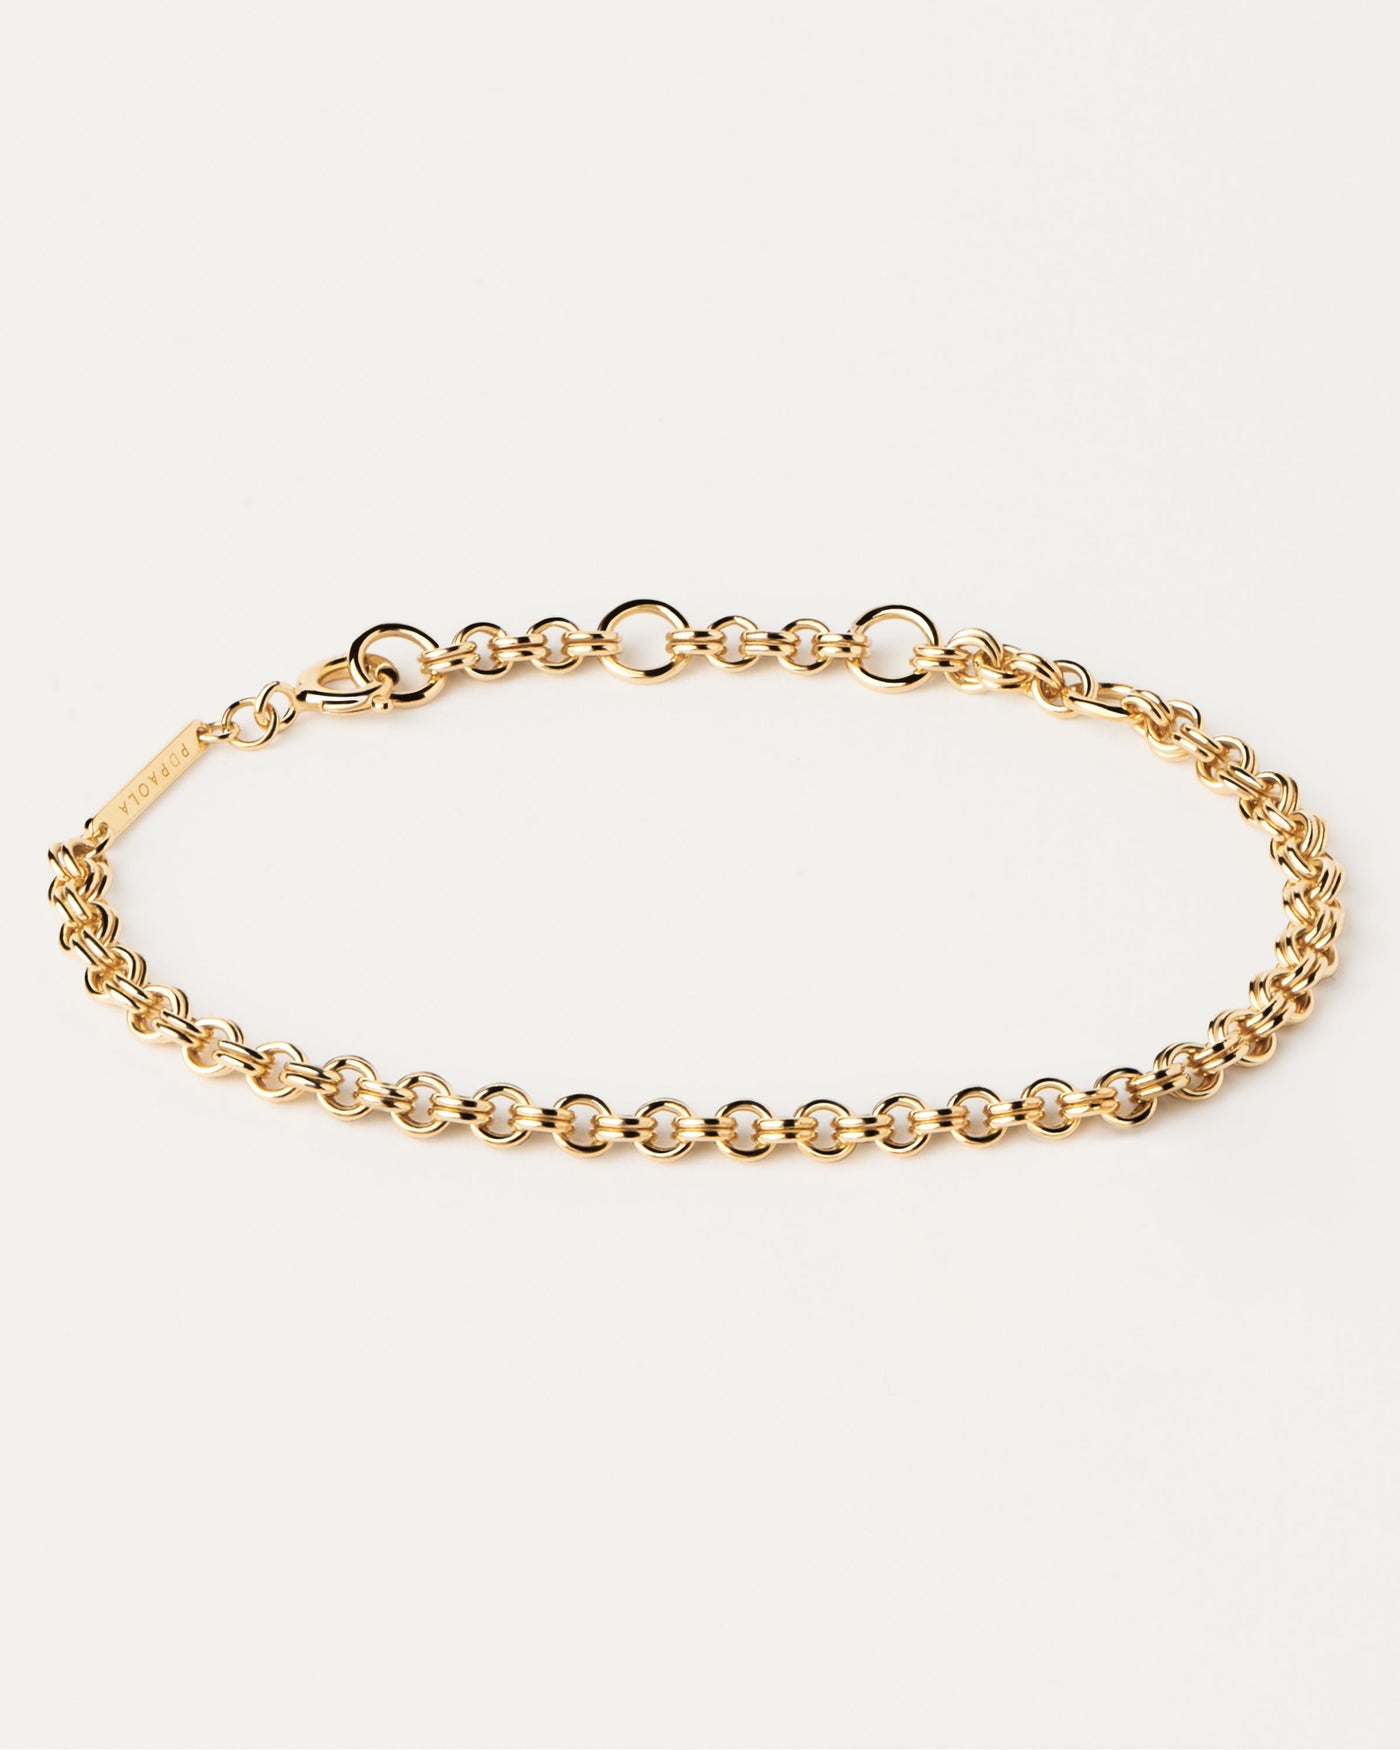 2023 Selection | Neo Bracelet. Gold-plated silver chain bracelet with double cable links. Get the latest arrival from PDPAOLA. Place your order safely and get this Best Seller. Free Shipping.